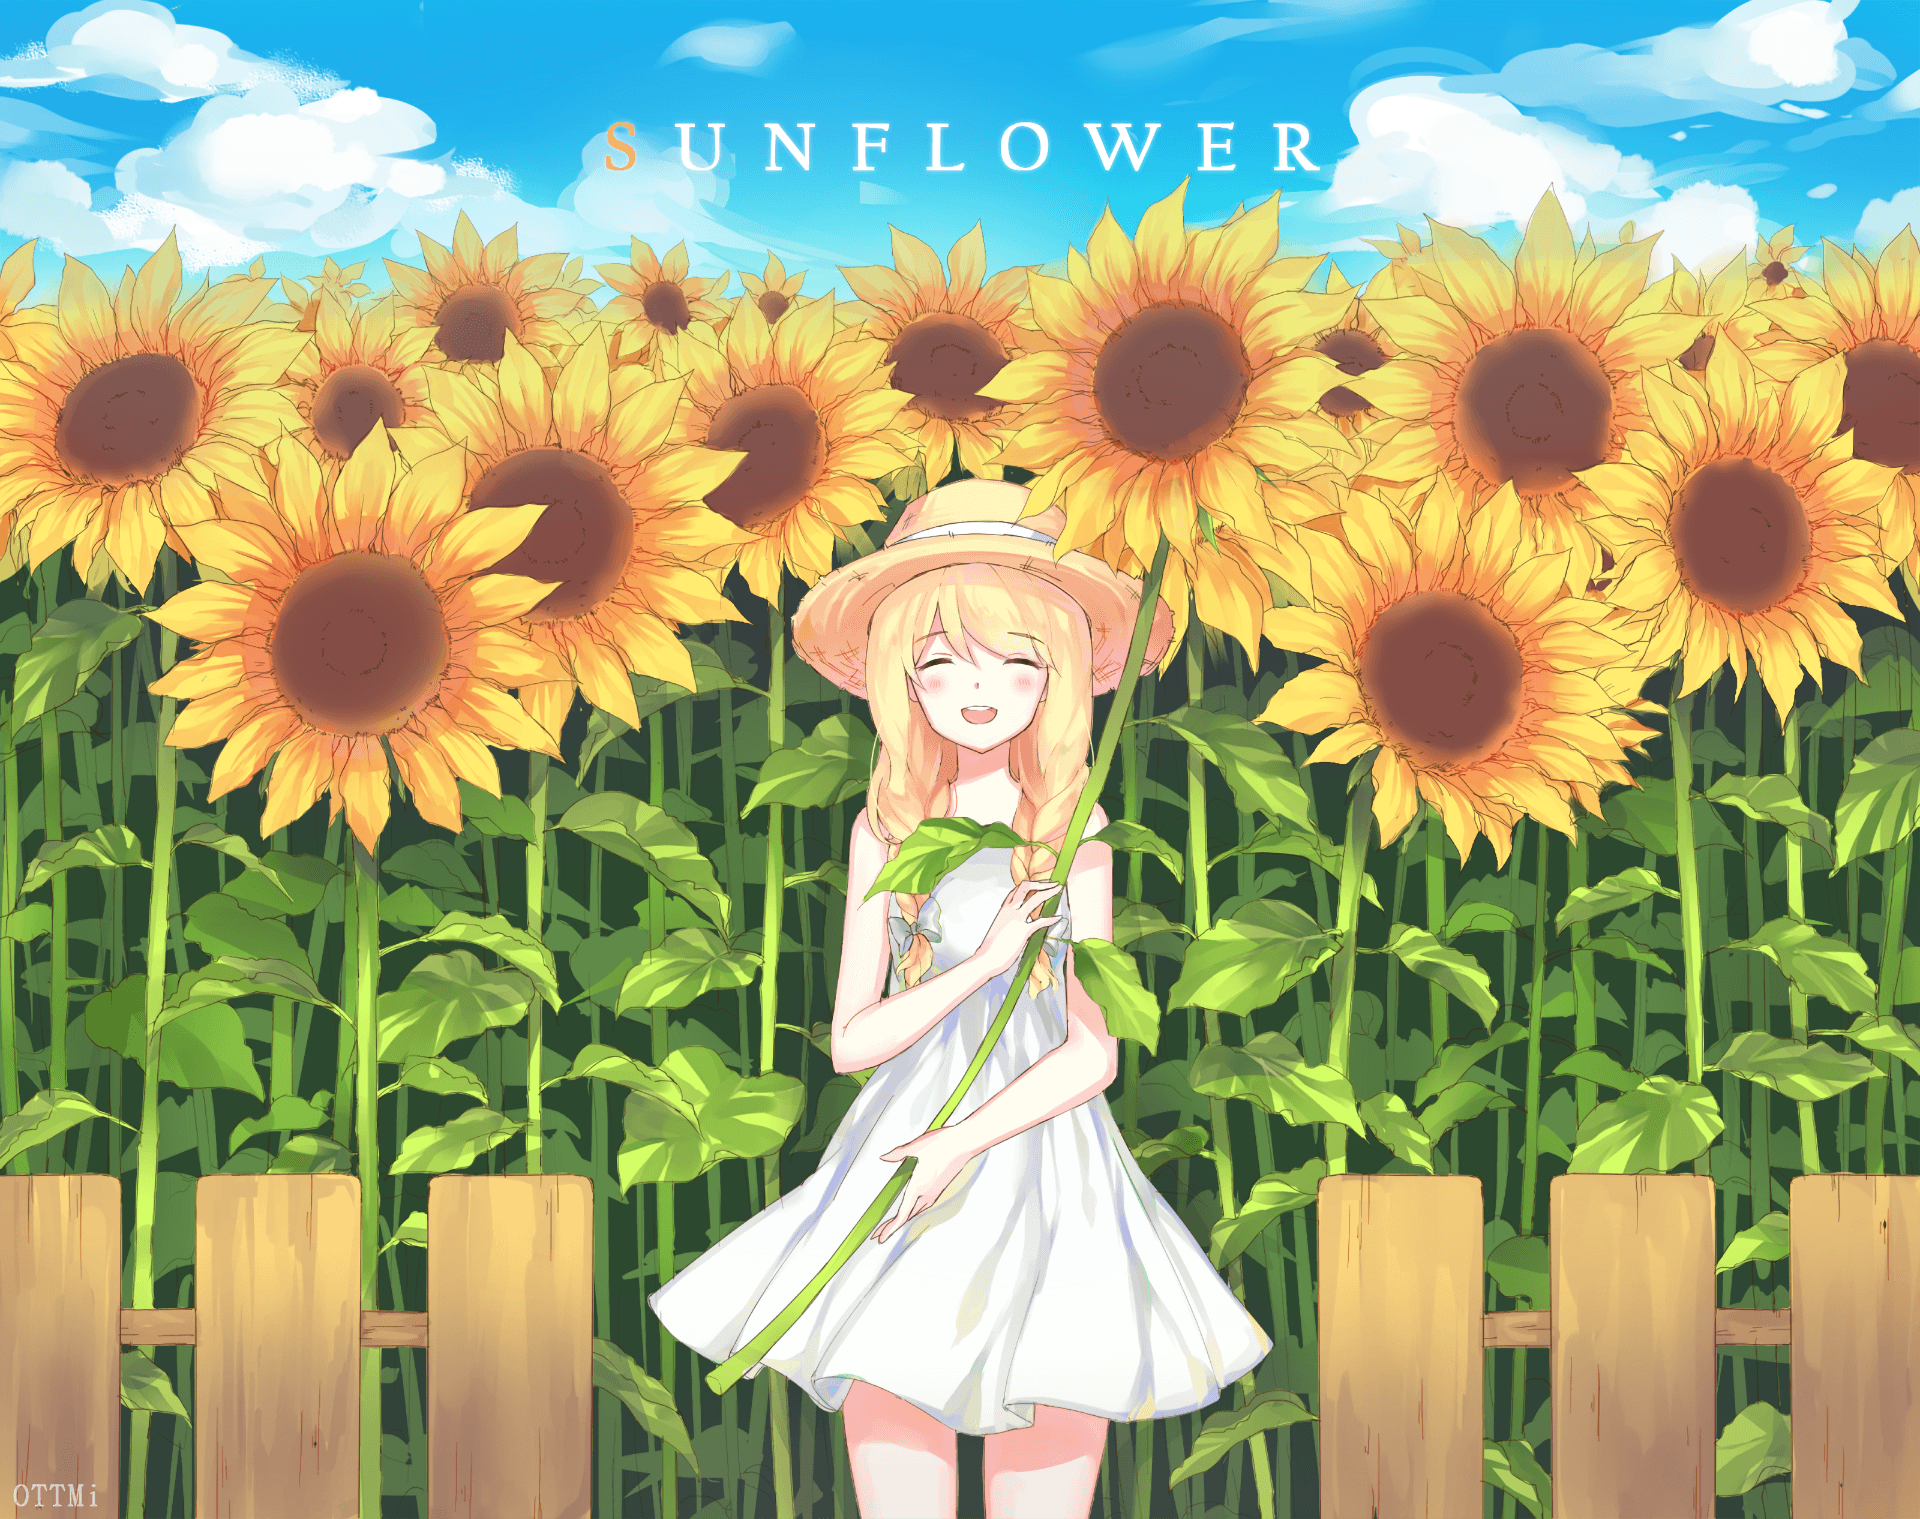 Wallpaper ID: 135700 / 2D, anime girls, anime, picture-in-picture,  MeaningJun, sunflowers, sunset free download